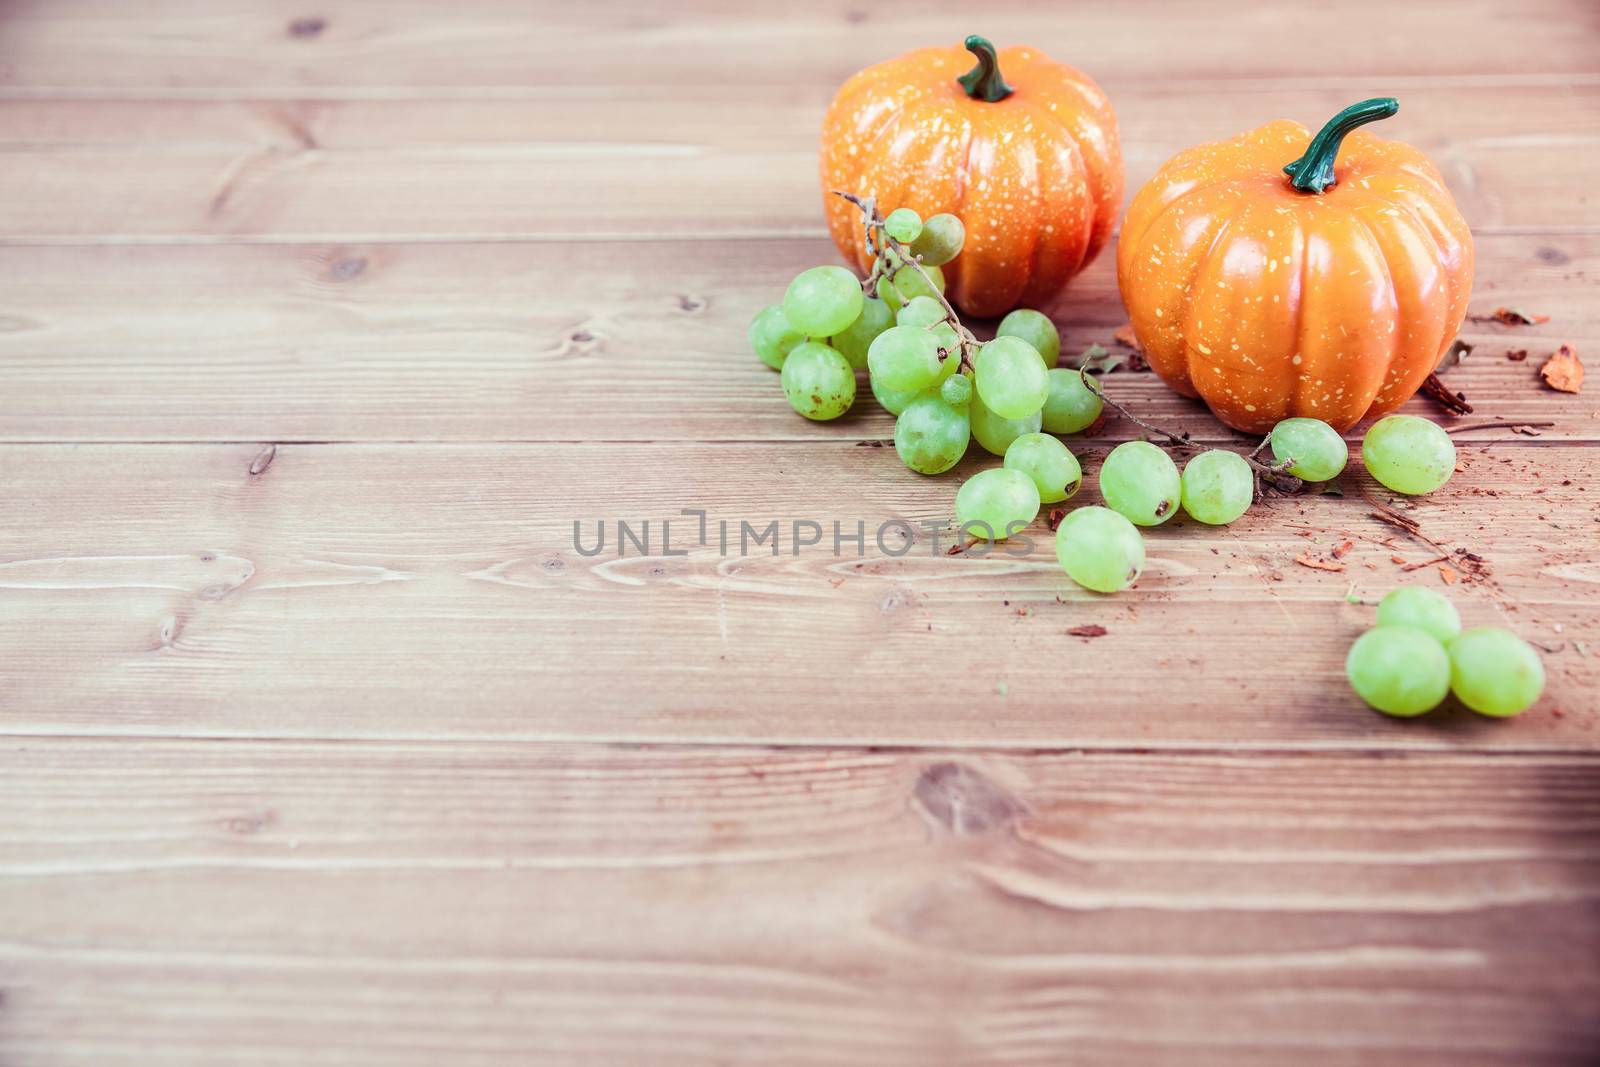 Pumpkin ornaments on desk with grapes